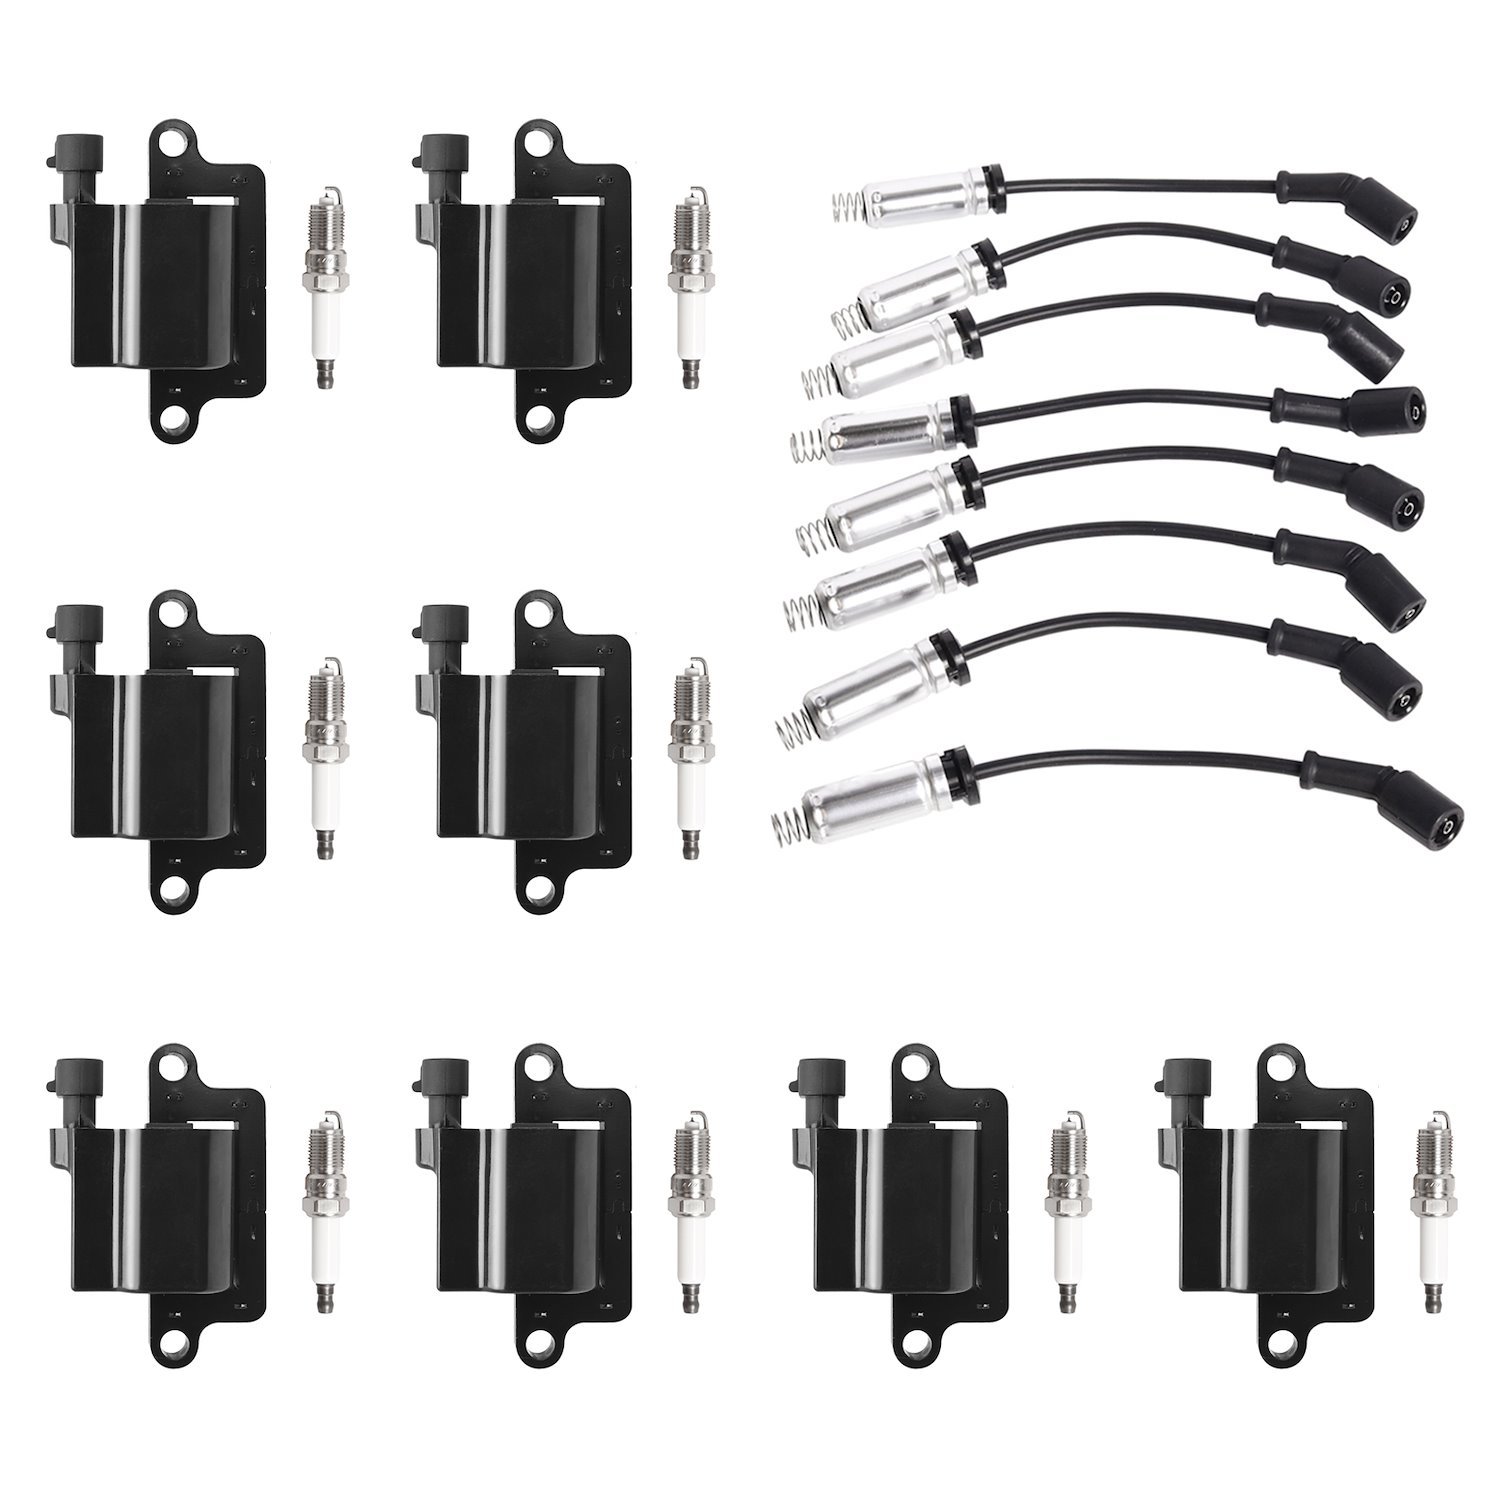 OE Replacement Ignition Coil, Spark Plug, and Spark Plug Wire Kit, Chevrolet Tahoe, GMC Yukon